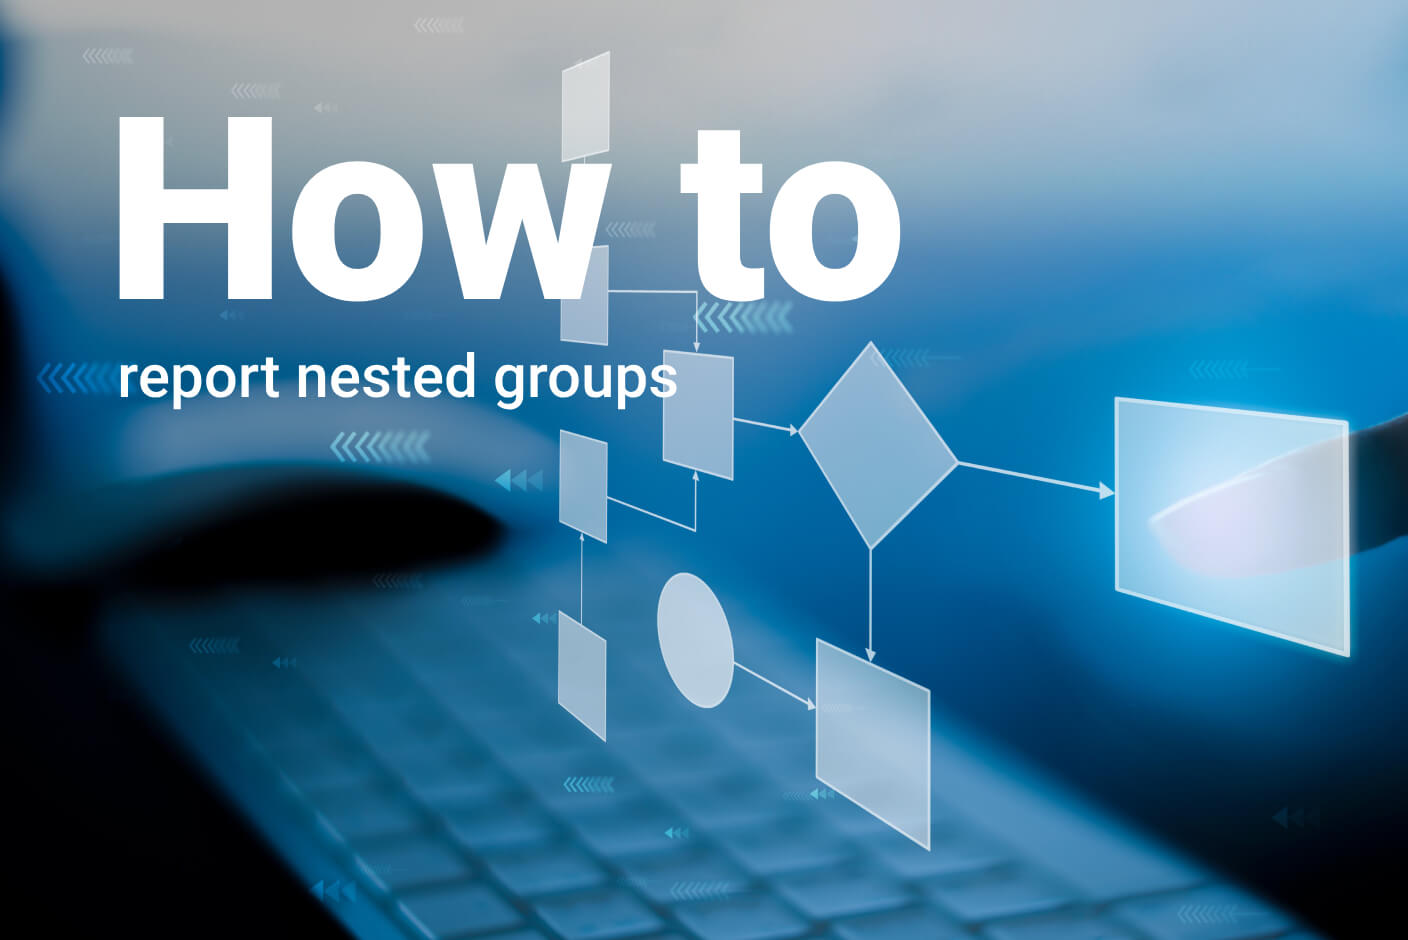 How to report nested groups